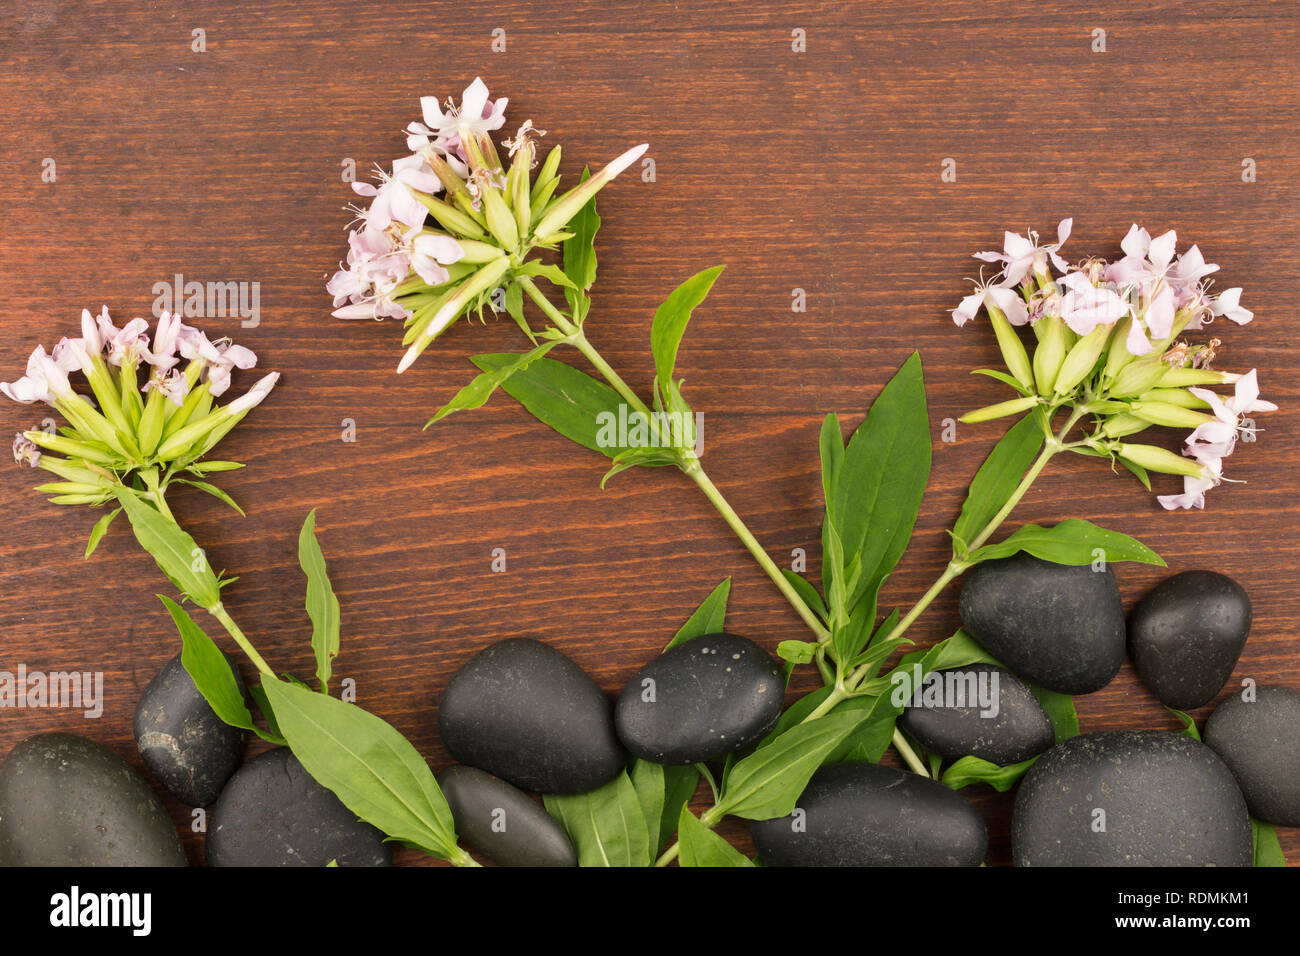 Wild field flowers growing from black stones on a dark wooden background. Top view. Conceptual image Stock Photo